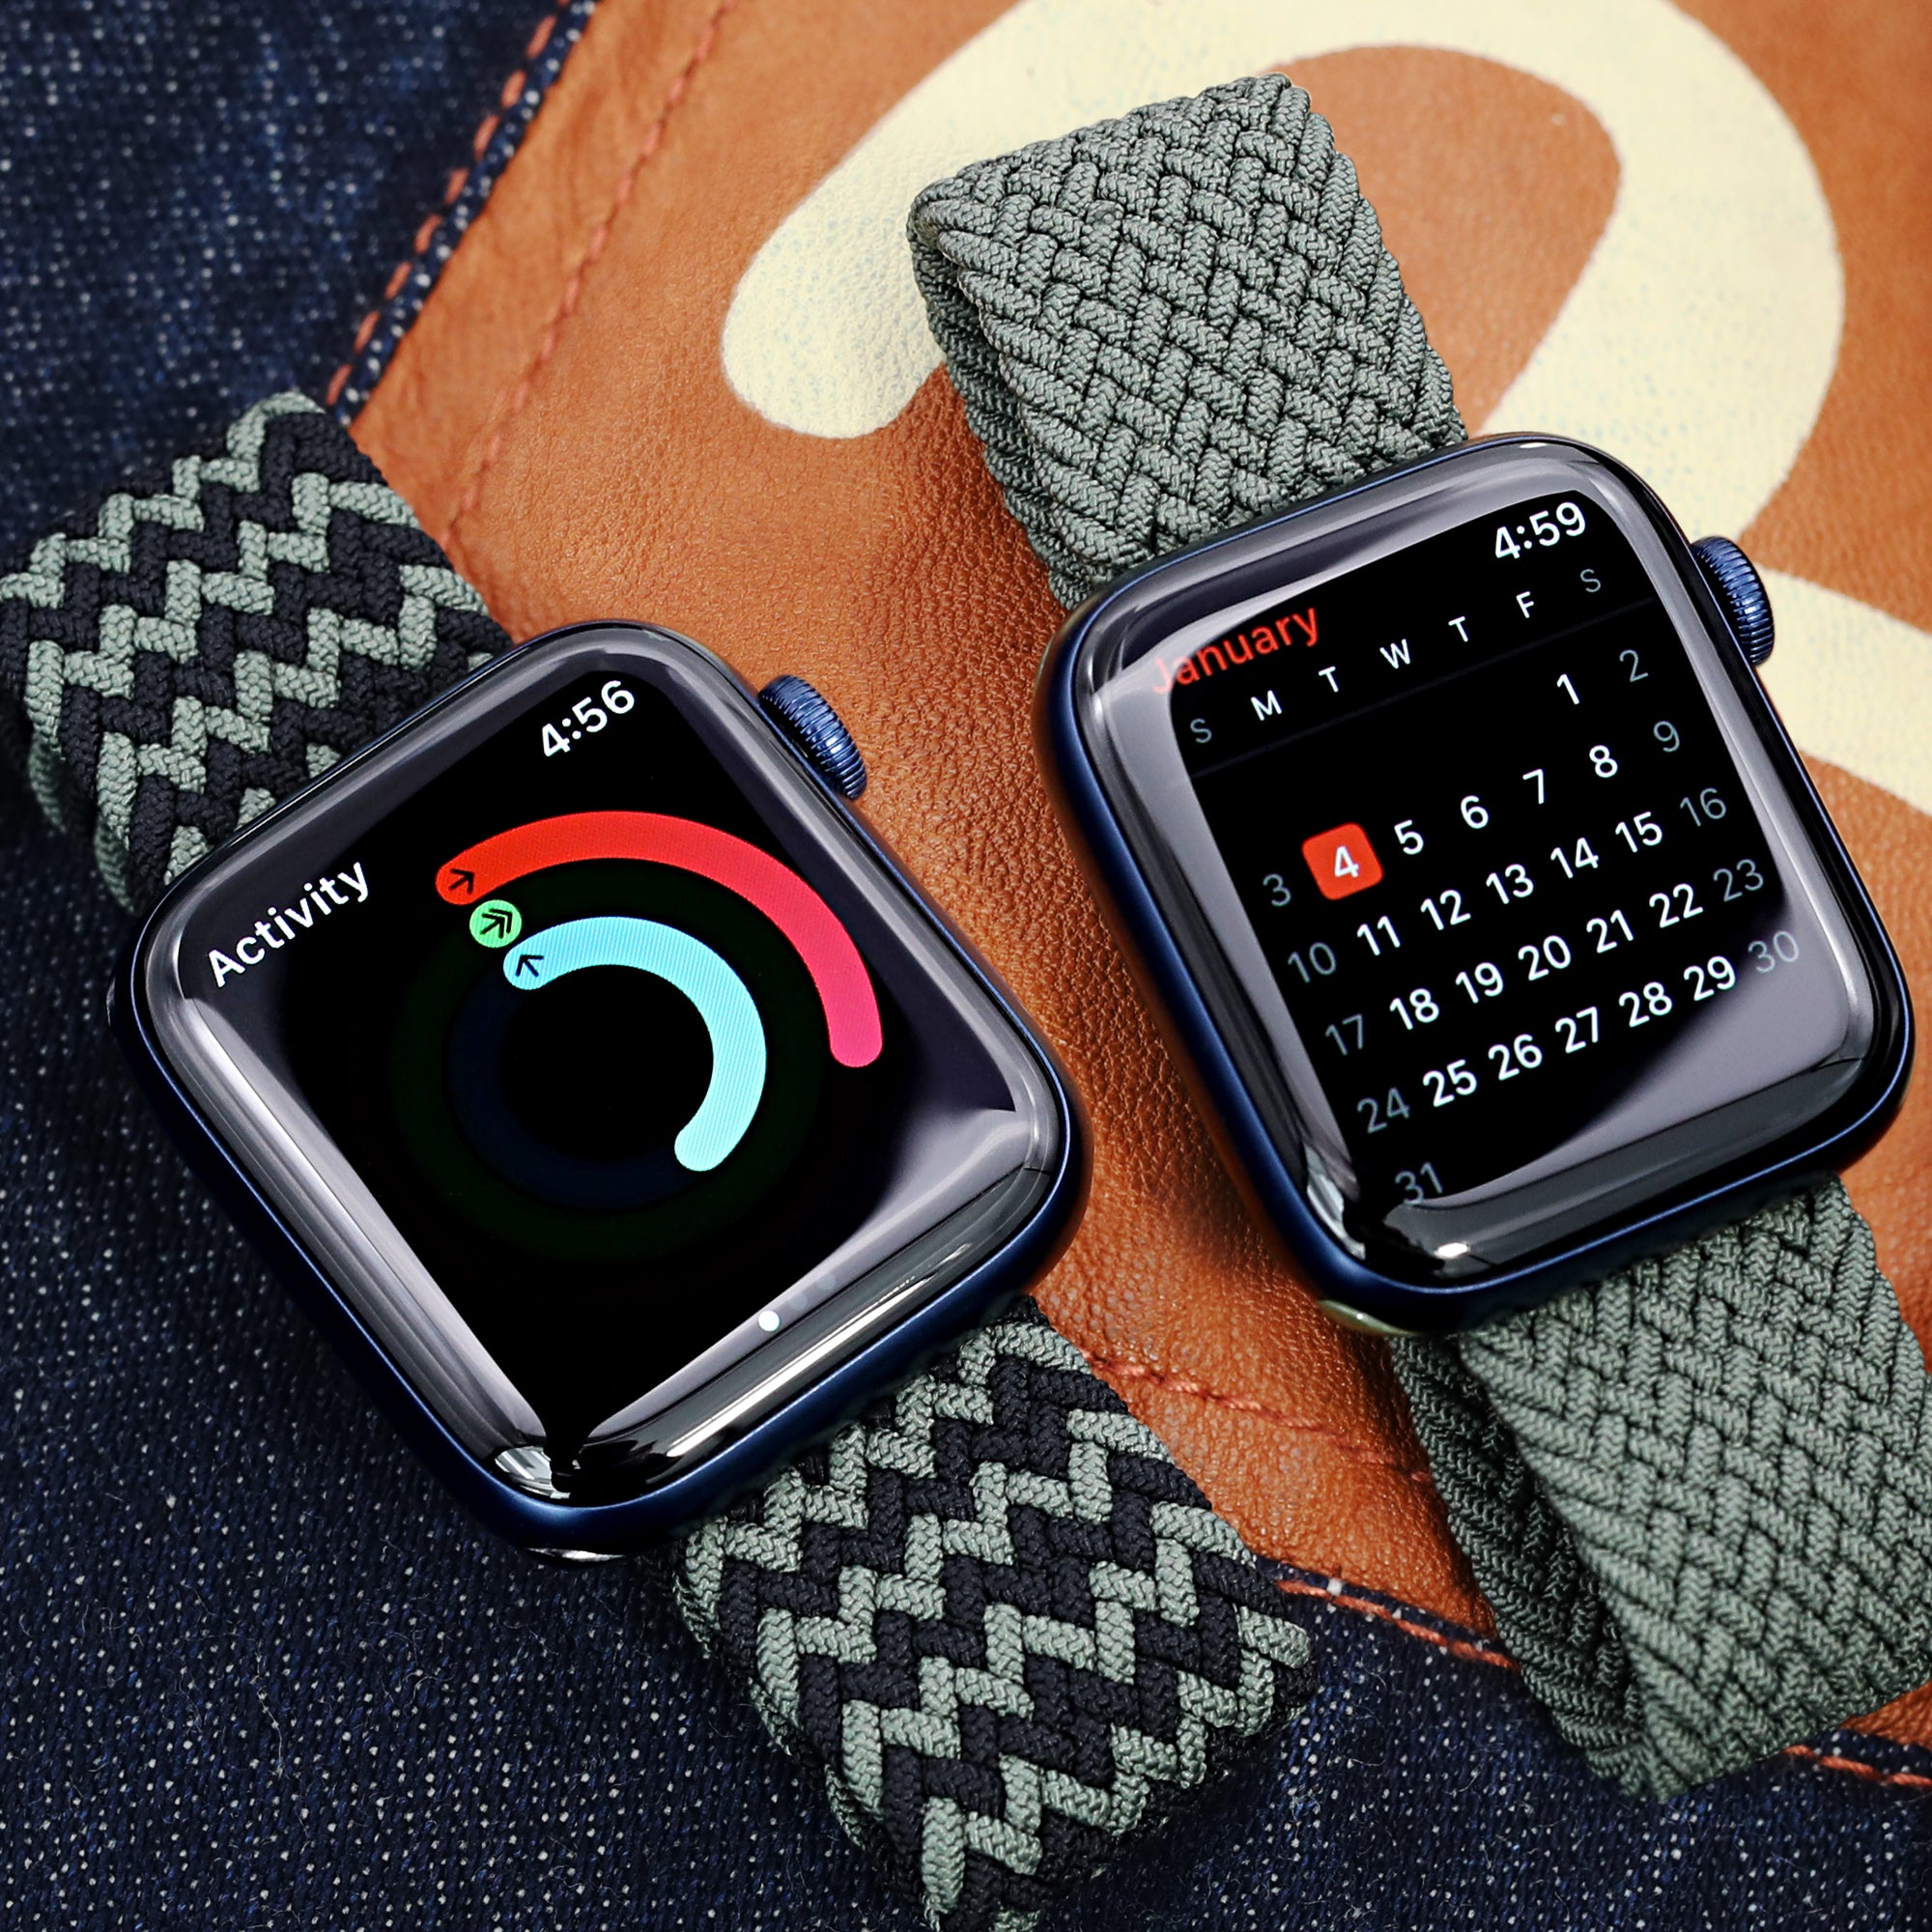 All you need to know from 6 Series of Apple Watch to Apple Watch Bands -  Strapcode